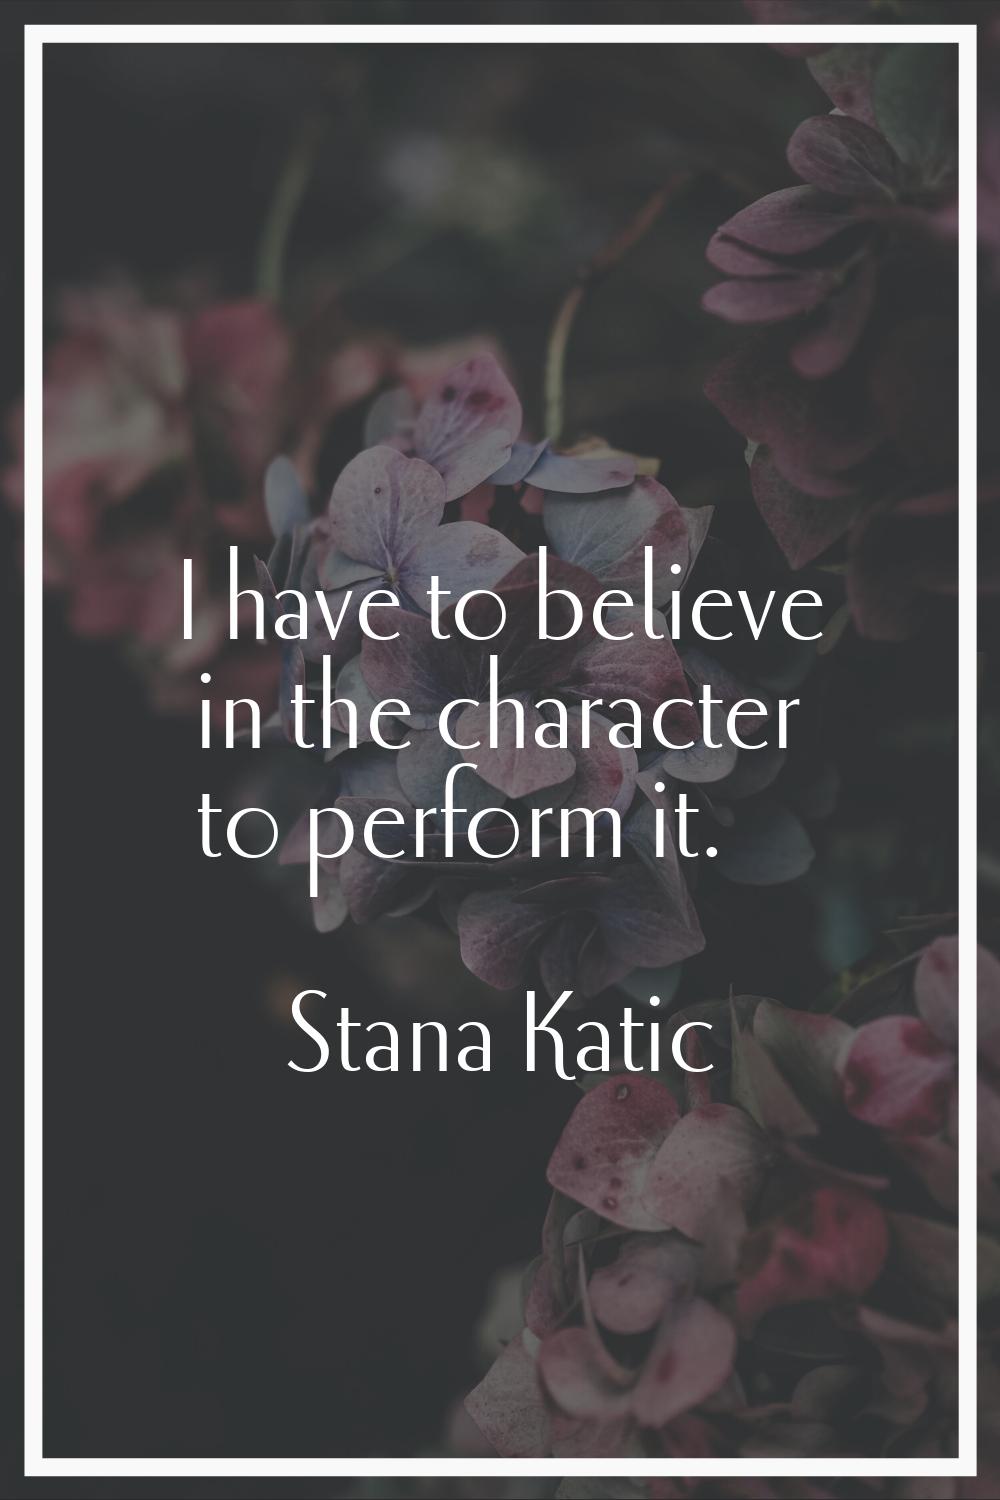 I have to believe in the character to perform it.